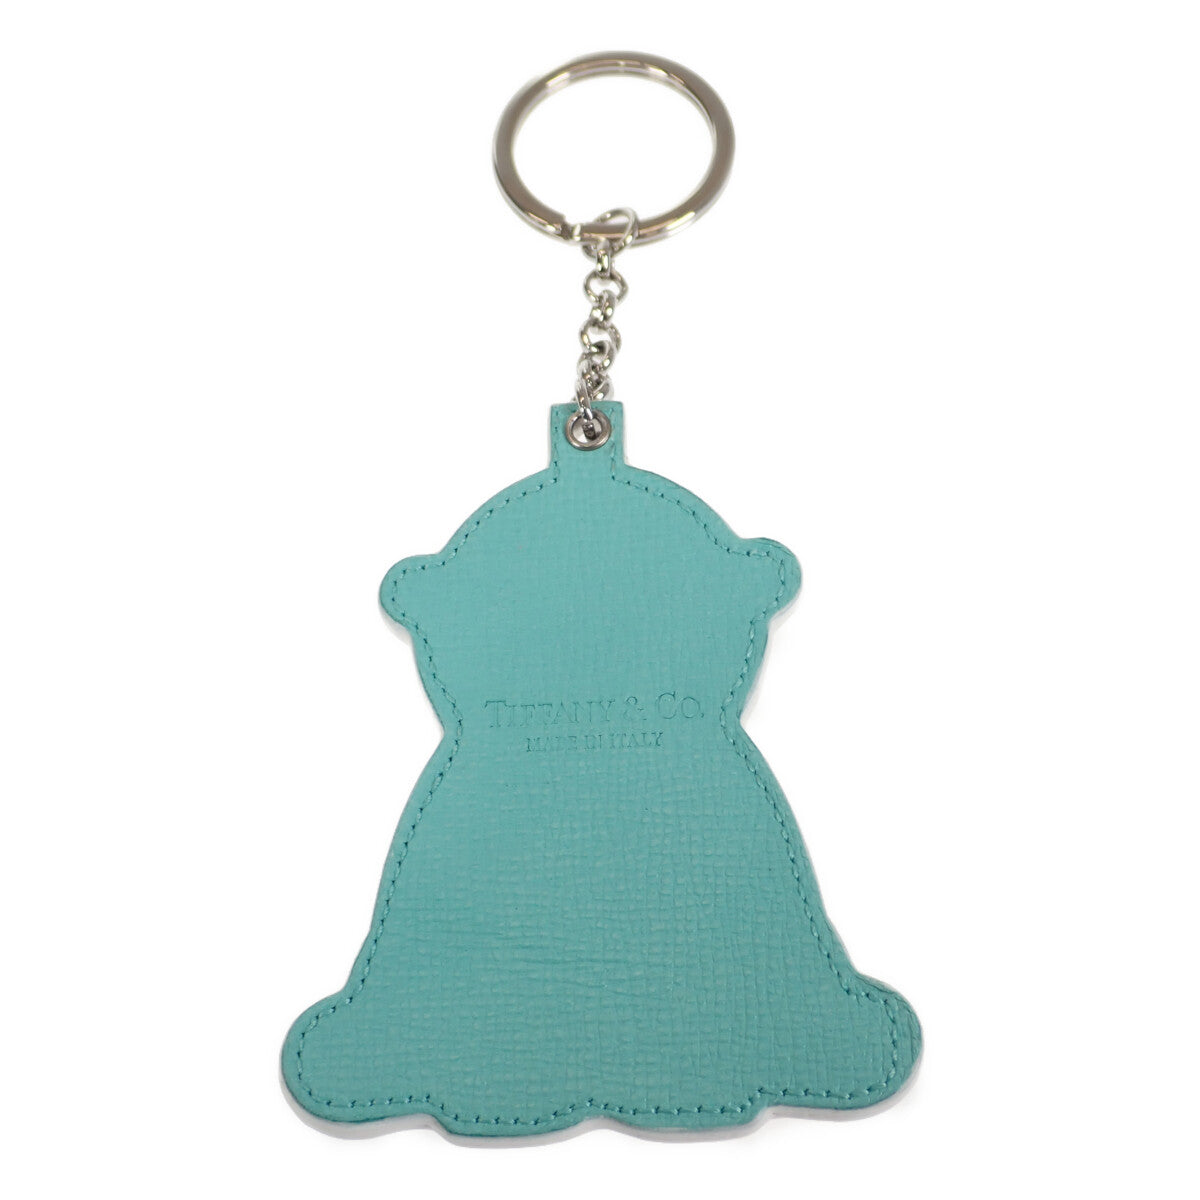 Tiffany & Co Leather Polar Bear Charm  Leather Key Chain in Good condition